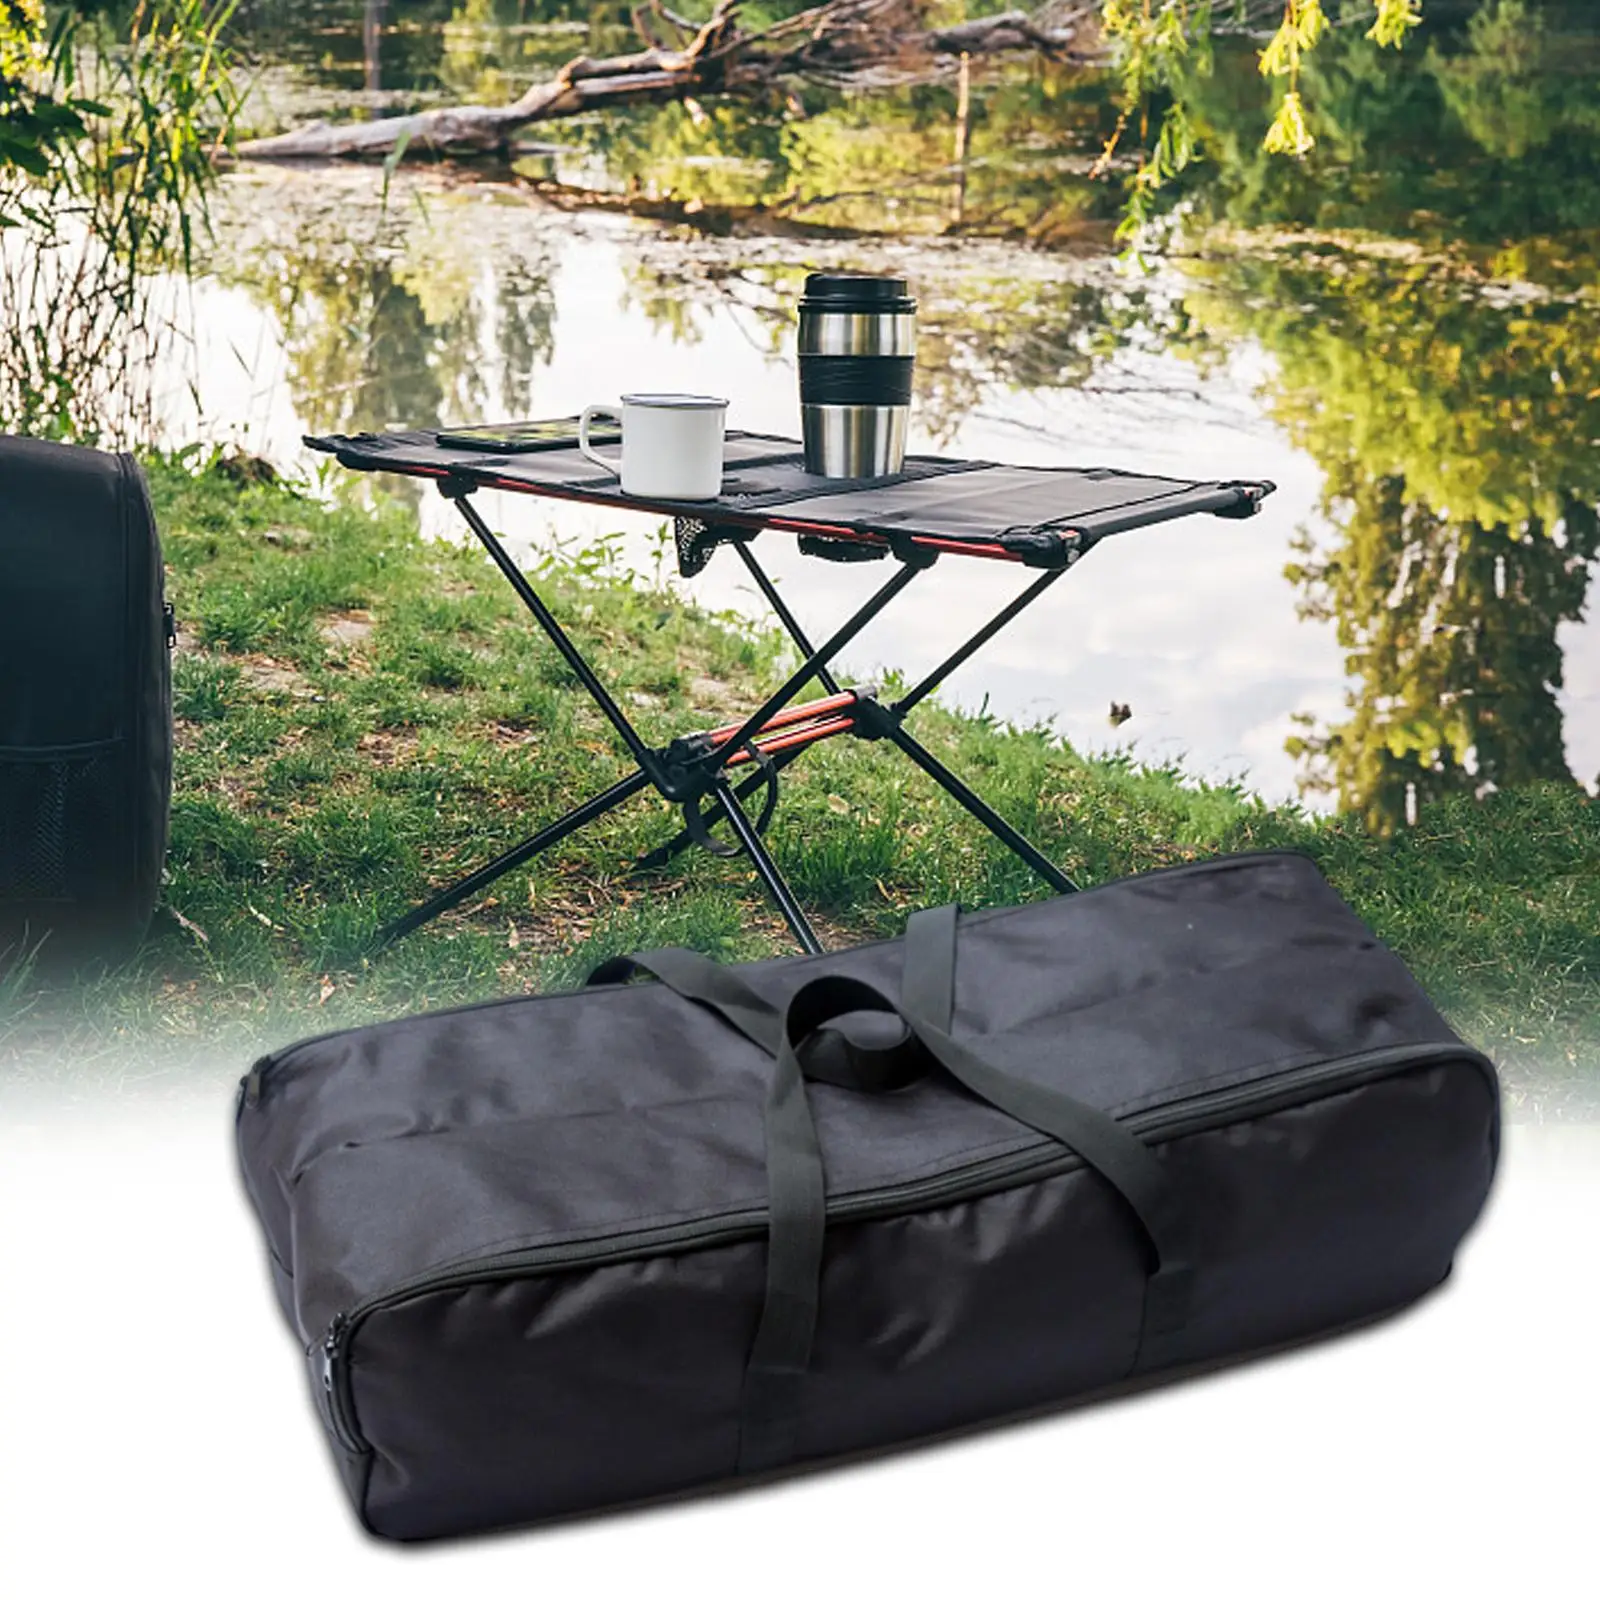 Camping Tool Bag Folding Chair Storage Bag Oxford Cloth for Umbrellas, Tripods, Monopods, Flash Light Stands Large Zippered Bag